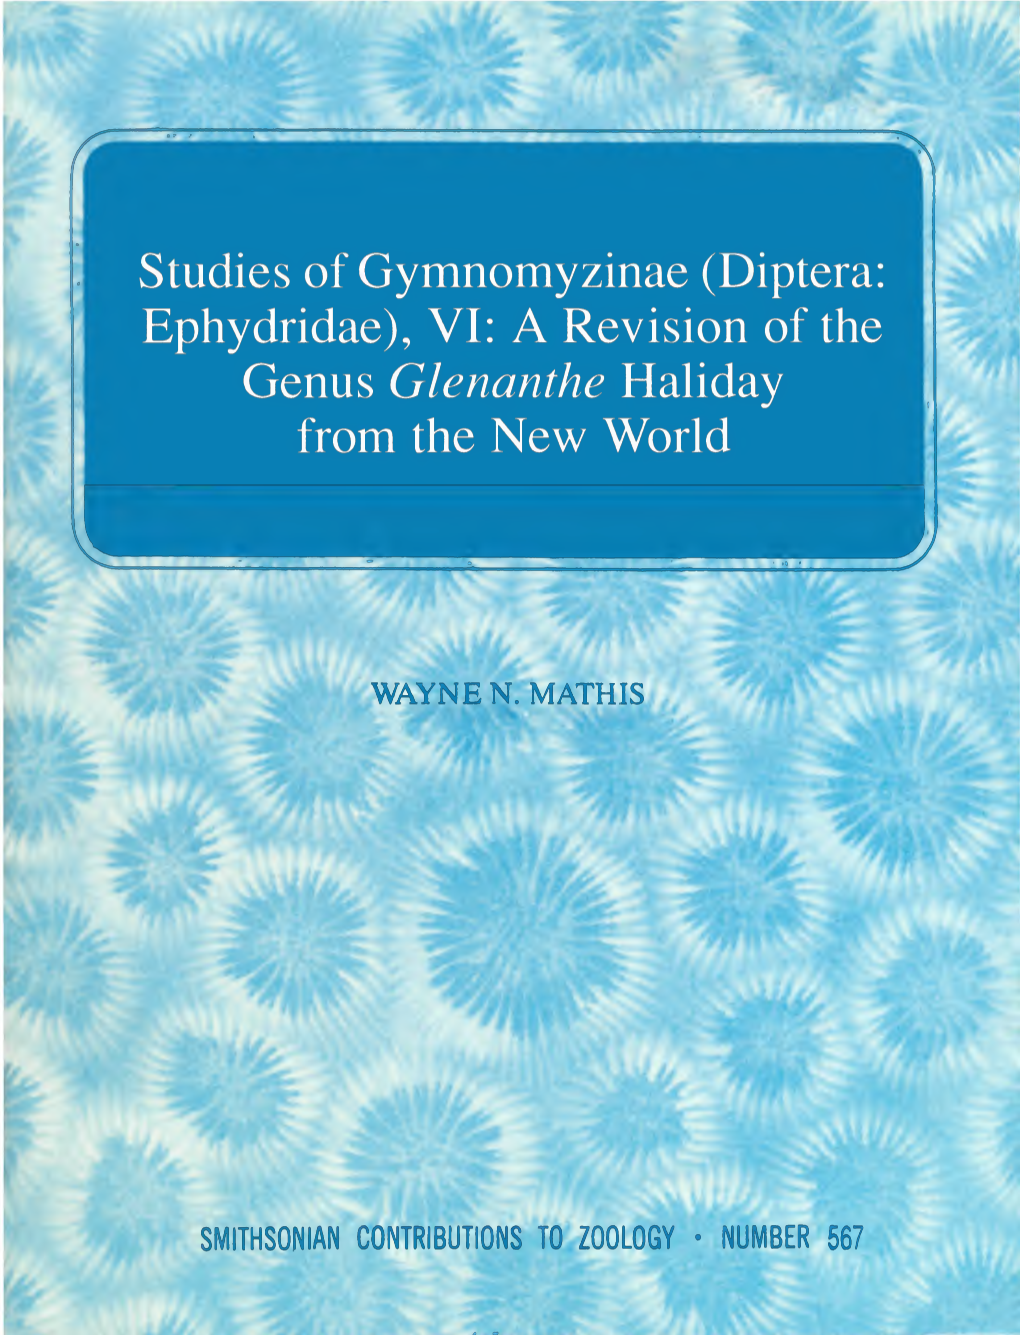 Studies of Gymnomyzinae (Diptera: Ephydridae), VI: a Revision of the Genus Glenanthe Haliday from the New World